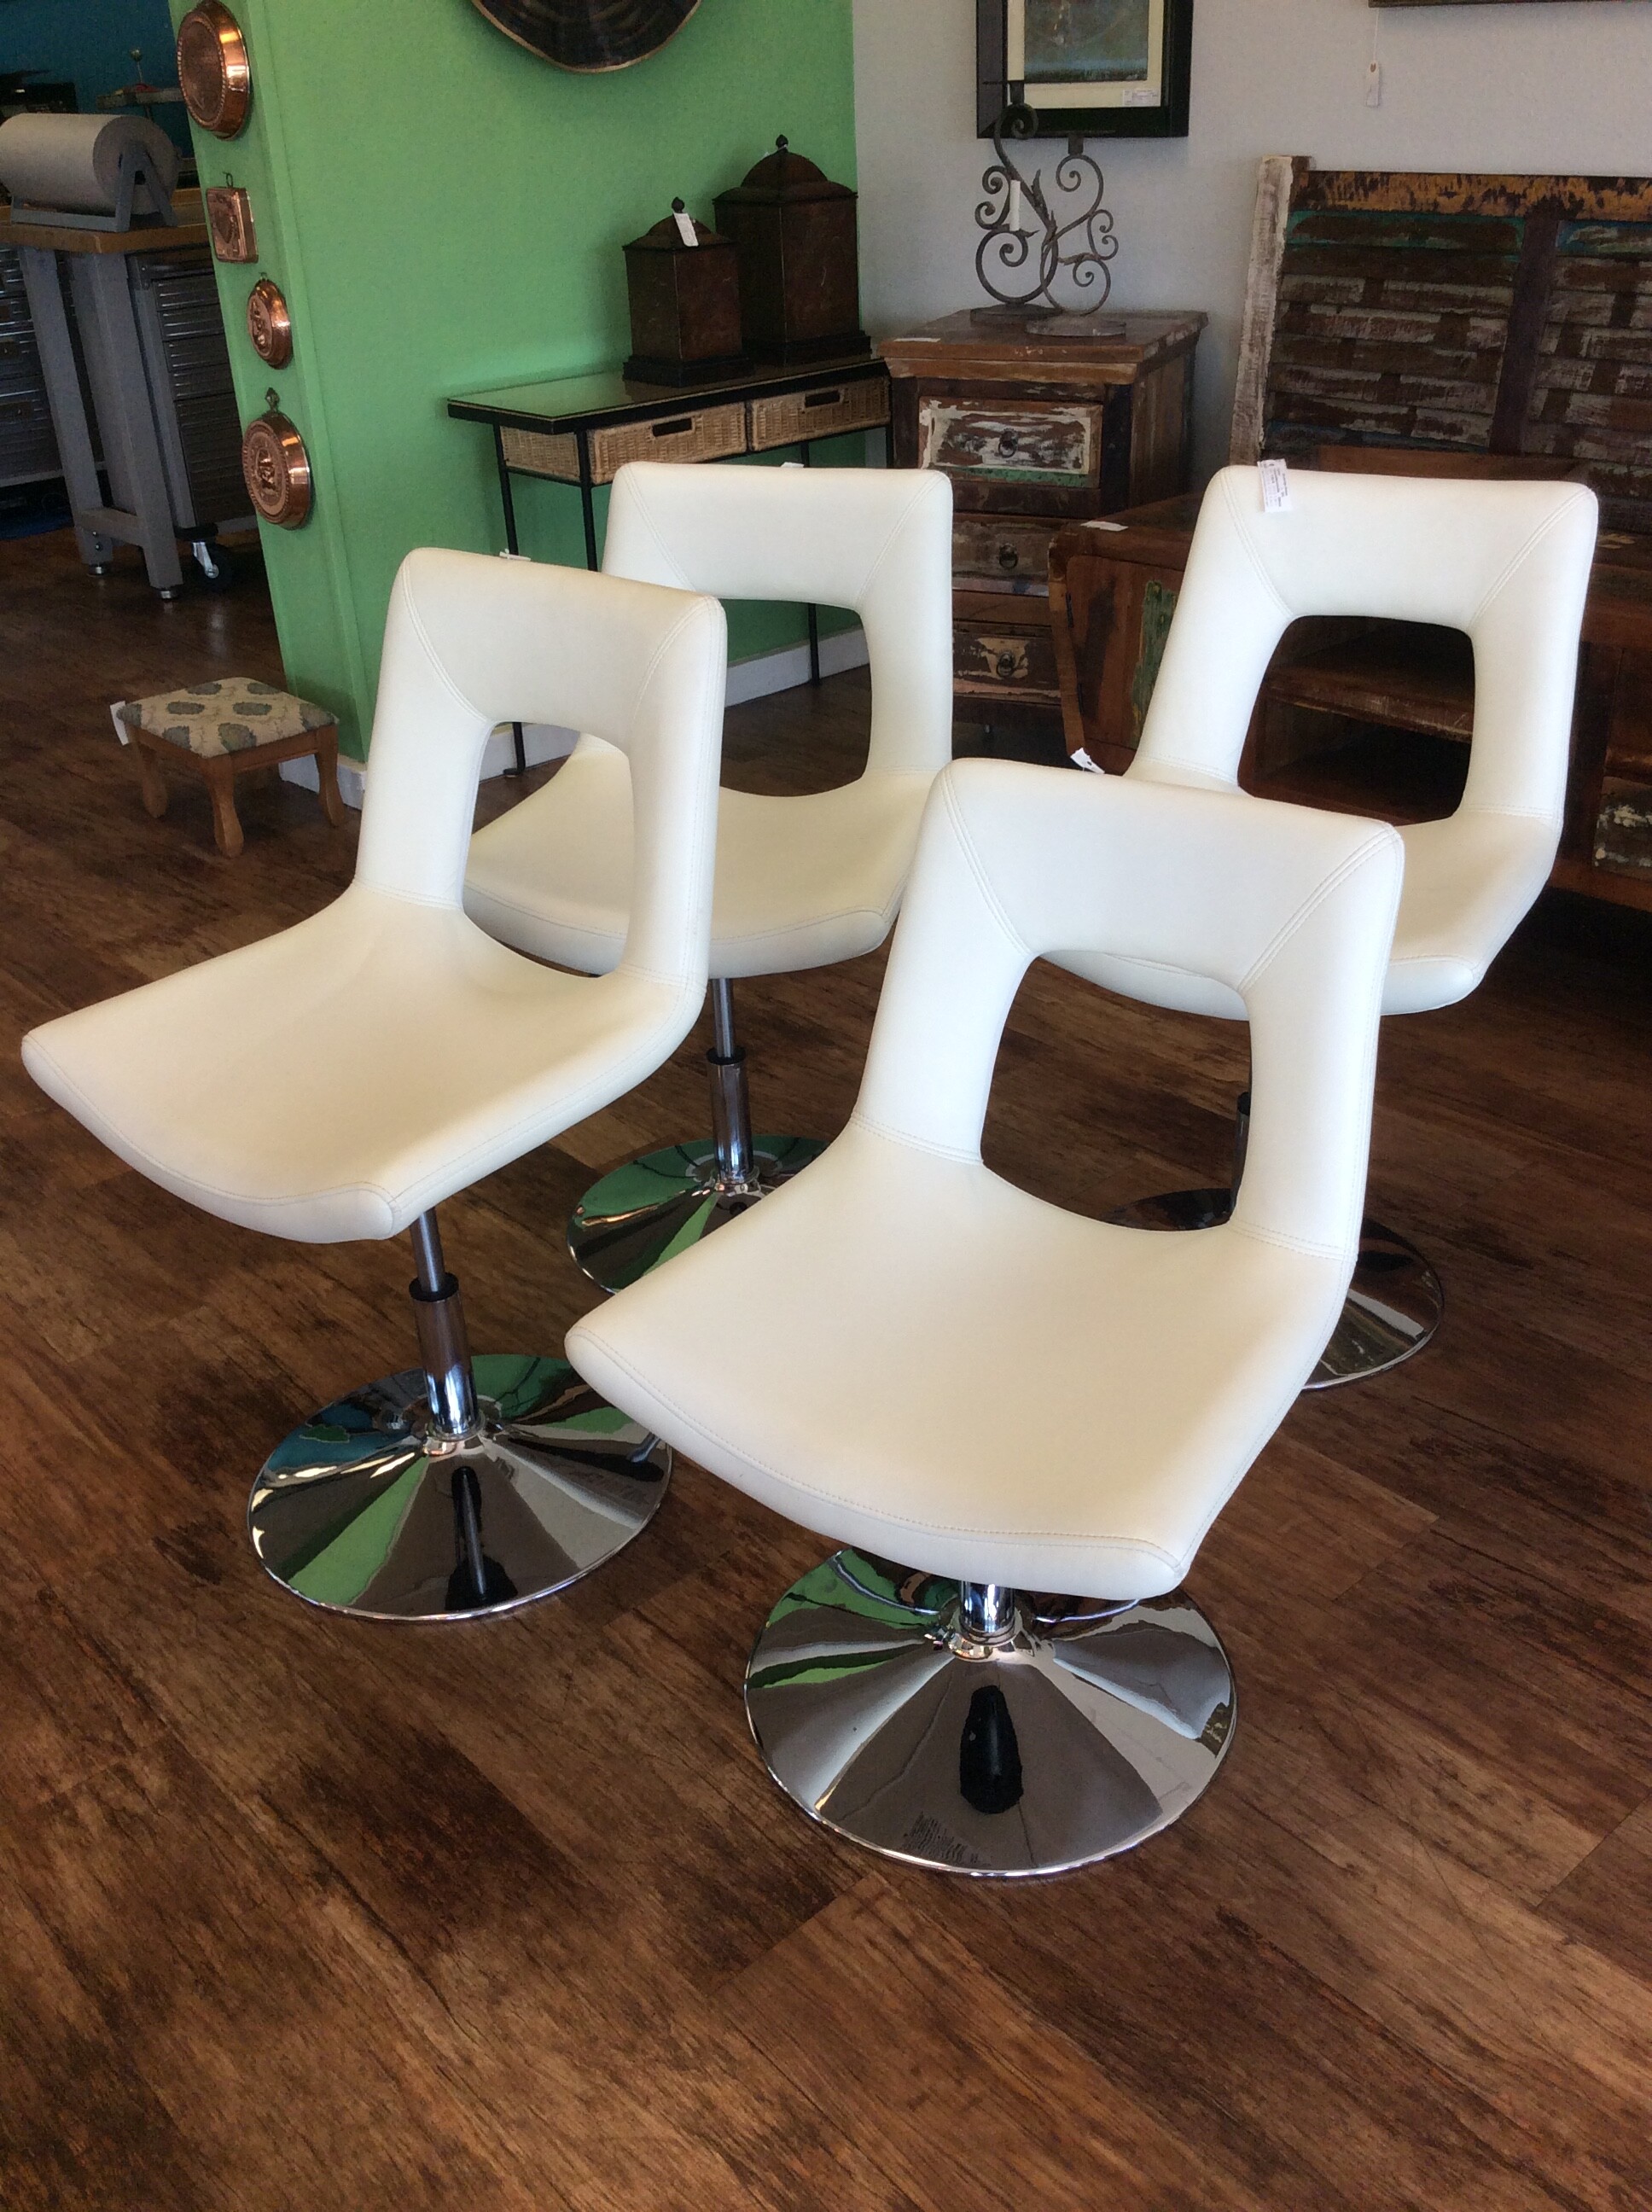 This is a set of 4, white leather, adjustable barstools with a chrome bottom.